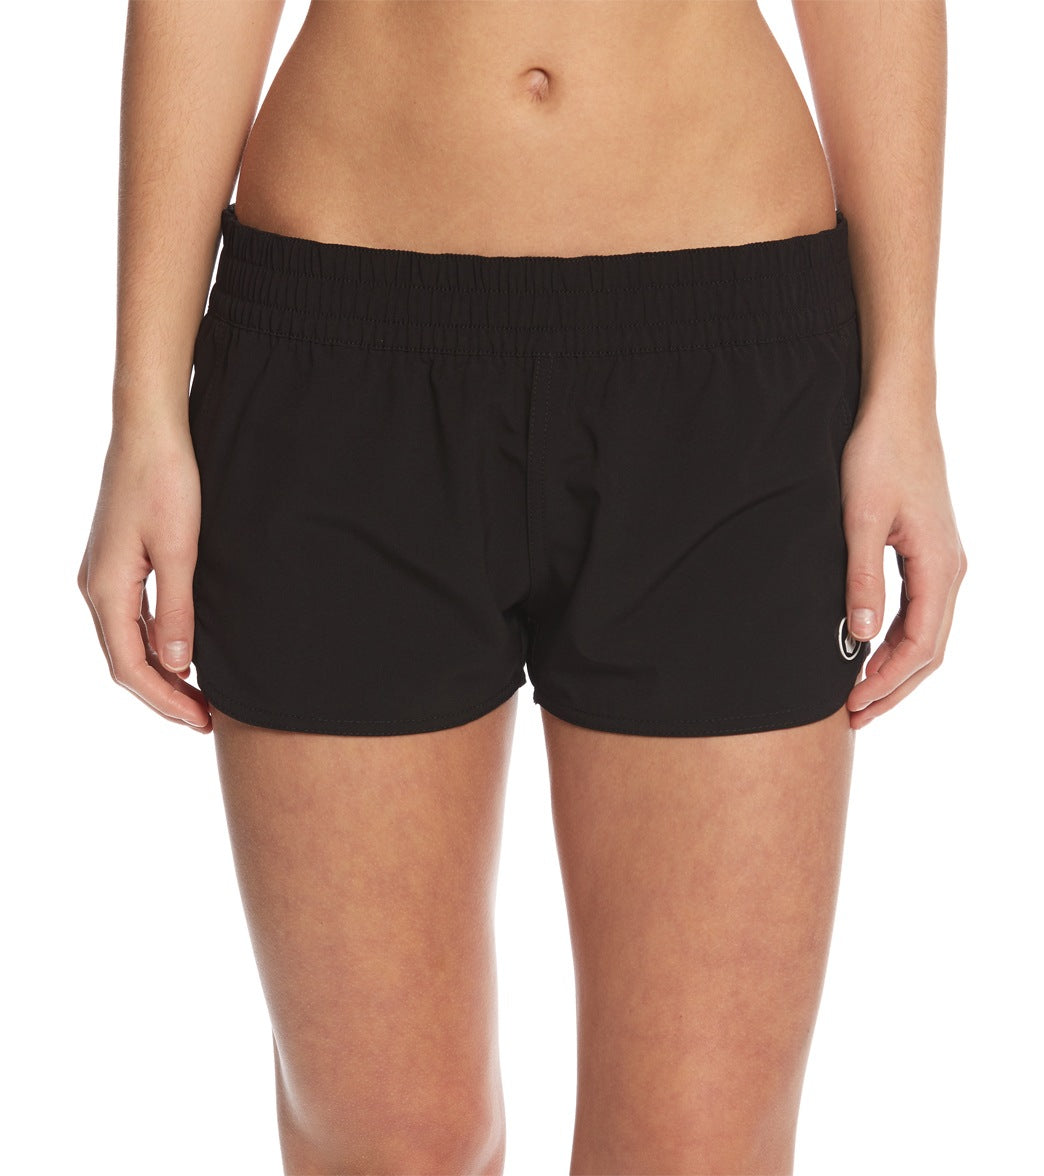 Volcom Simply Solid 2 Boardshorts - Black X-Small Polyester/Elastane - Swimoutlet.com